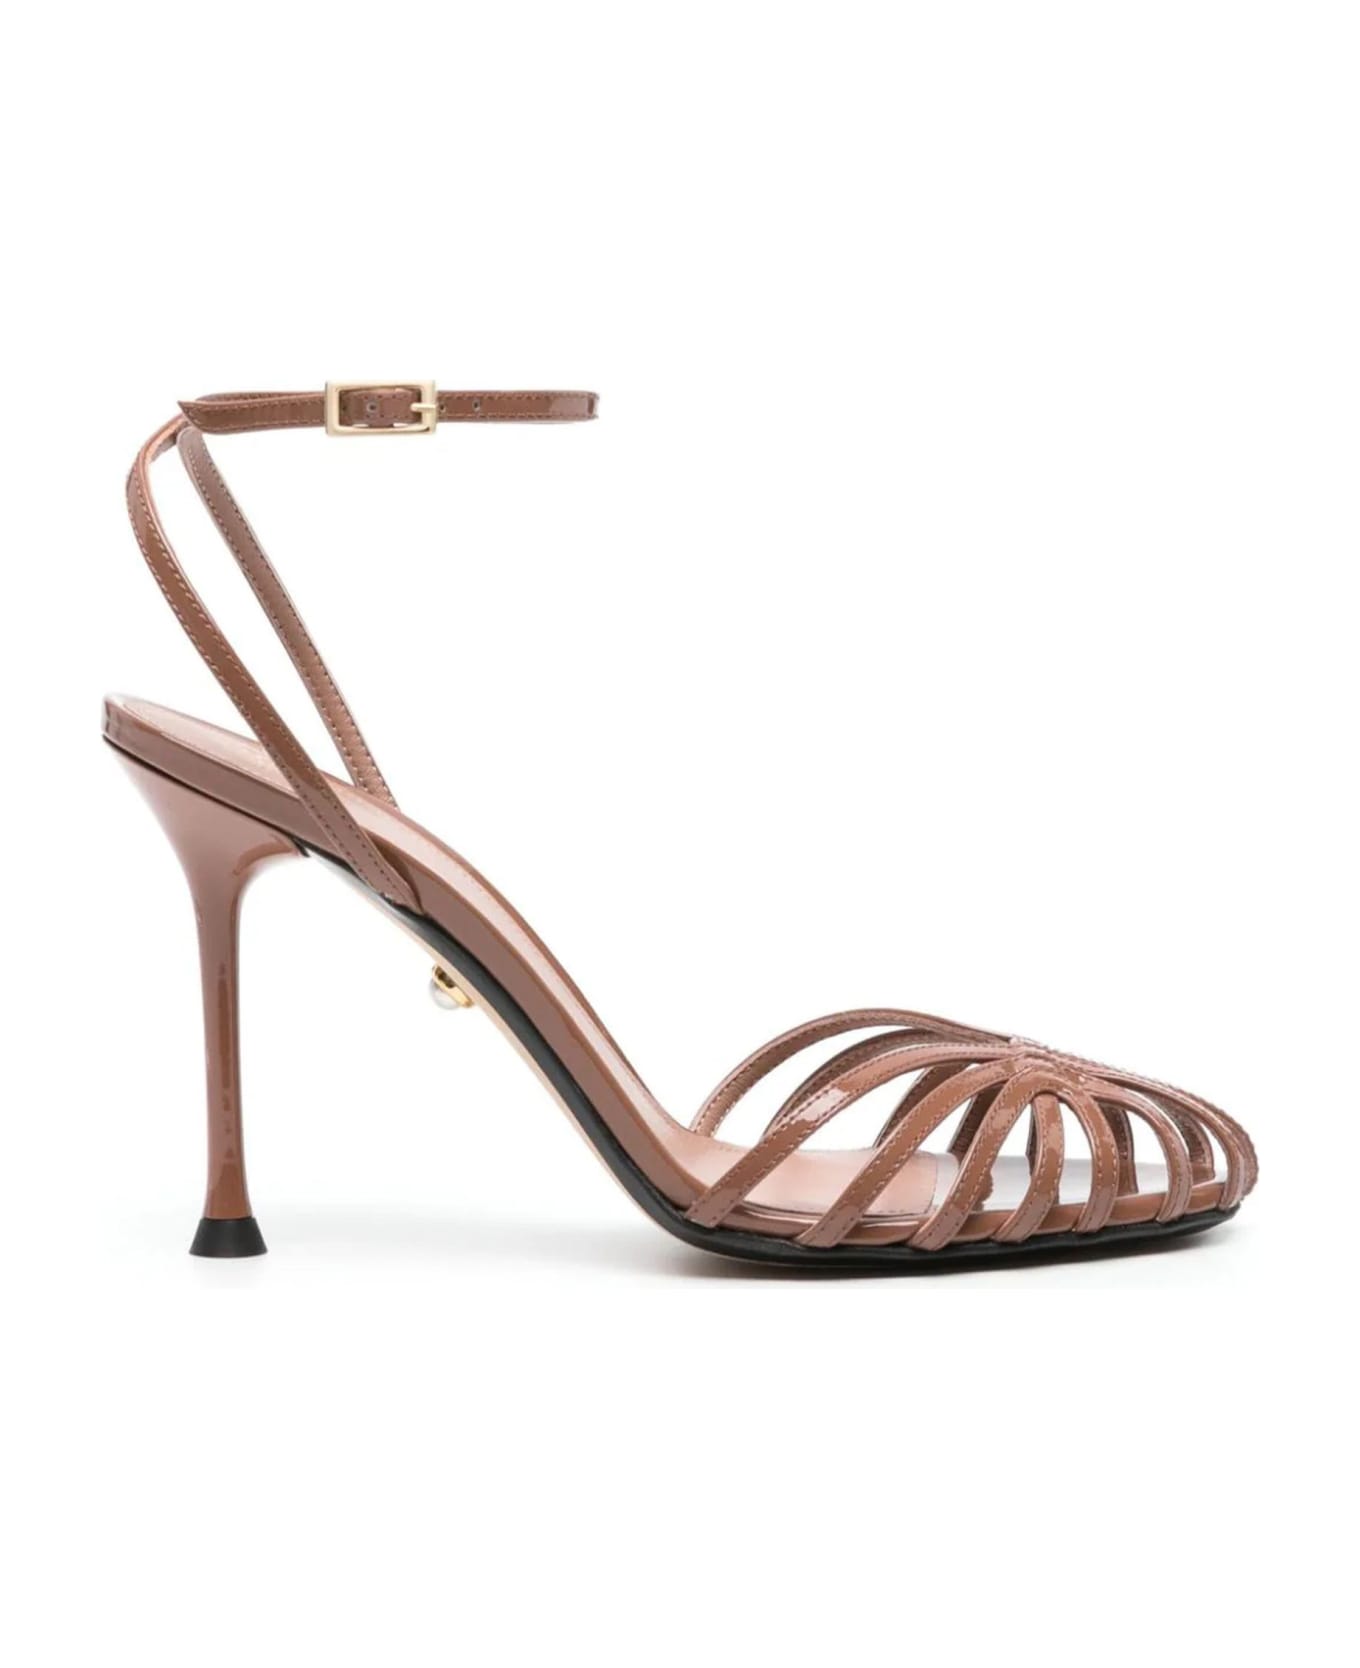 Alevì Chocolate Brown Calf Leather Sandals - Brown サンダル